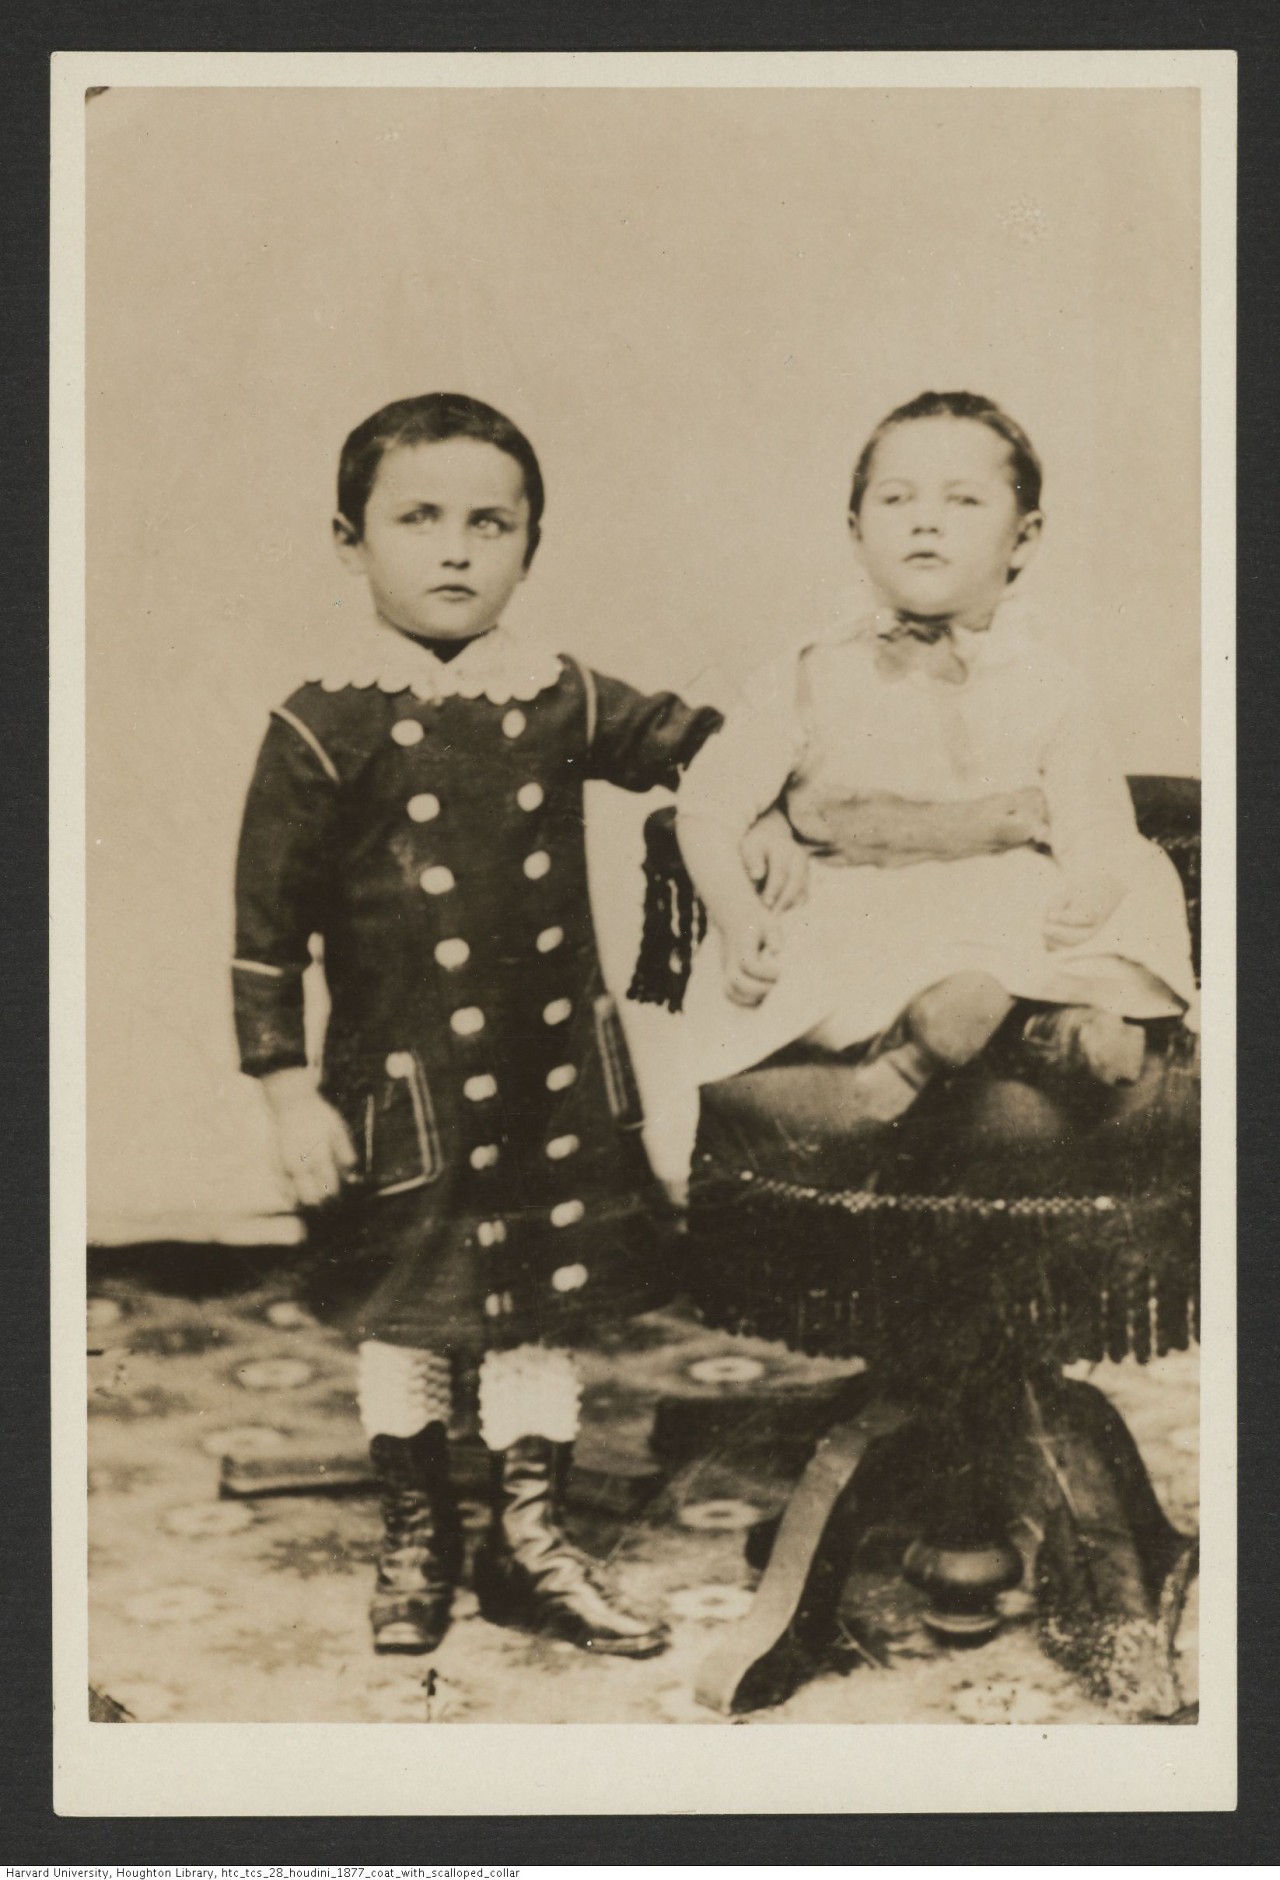 The 3-years-old Erik in 1877 with his sister